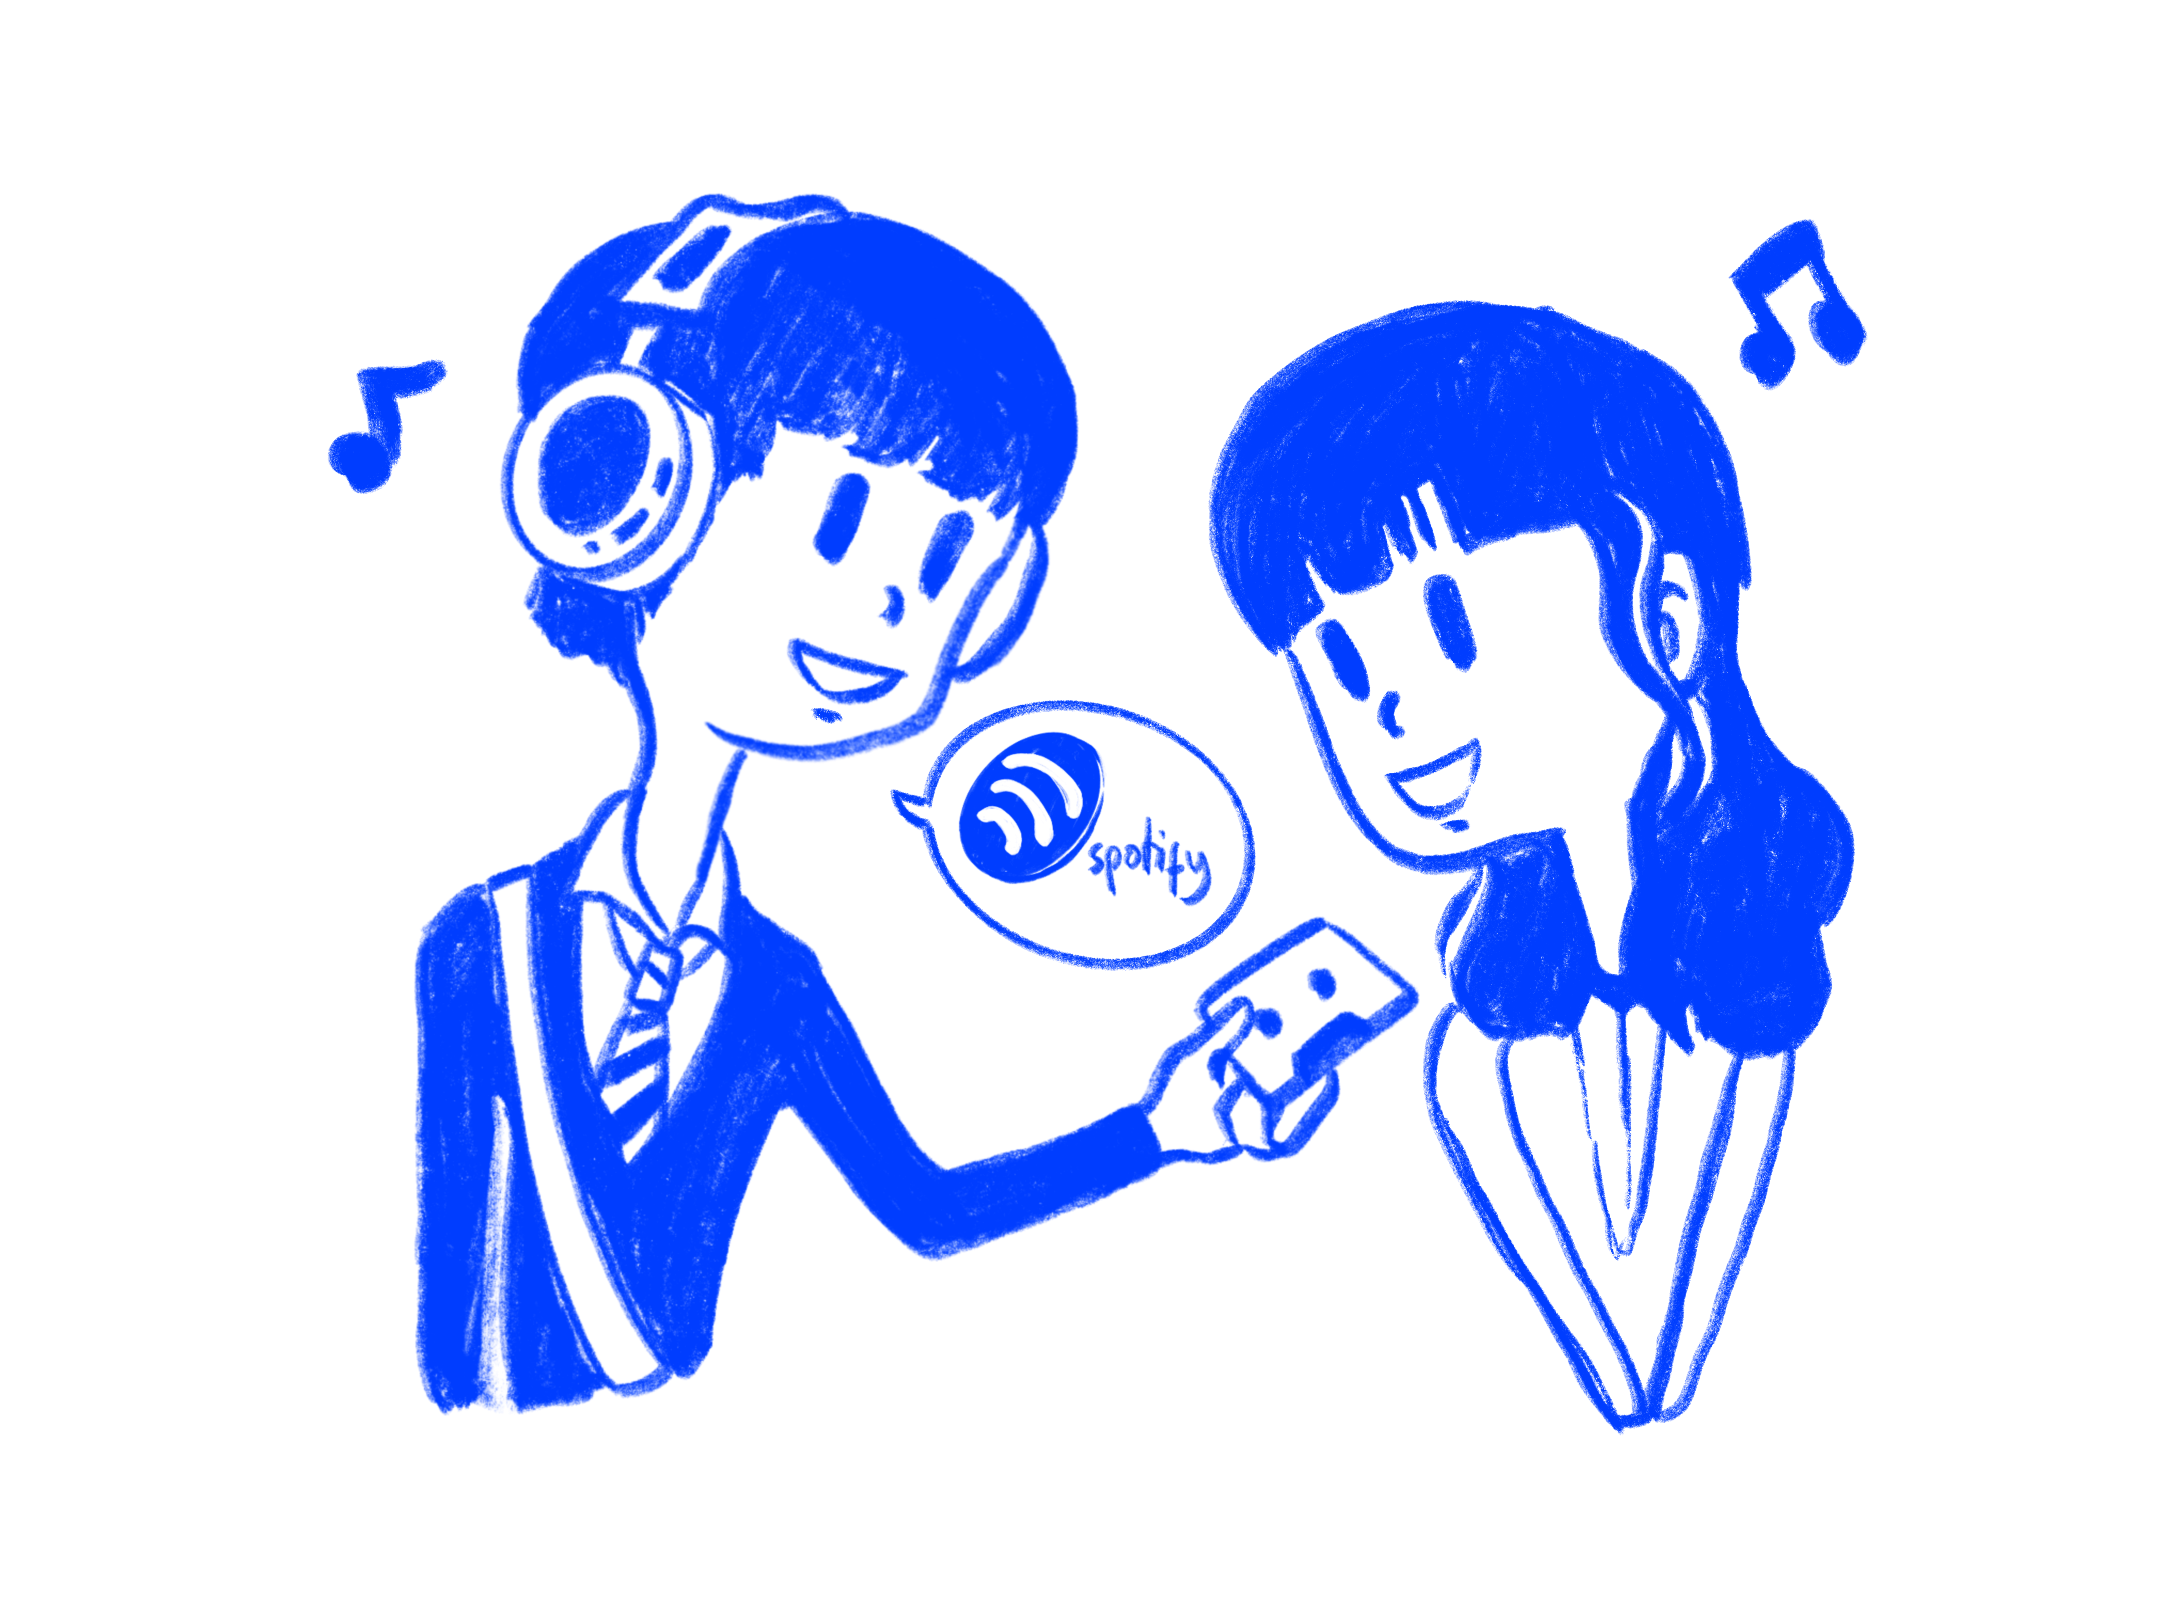 Illustration of a man and a woman interact with each other and show Spotify